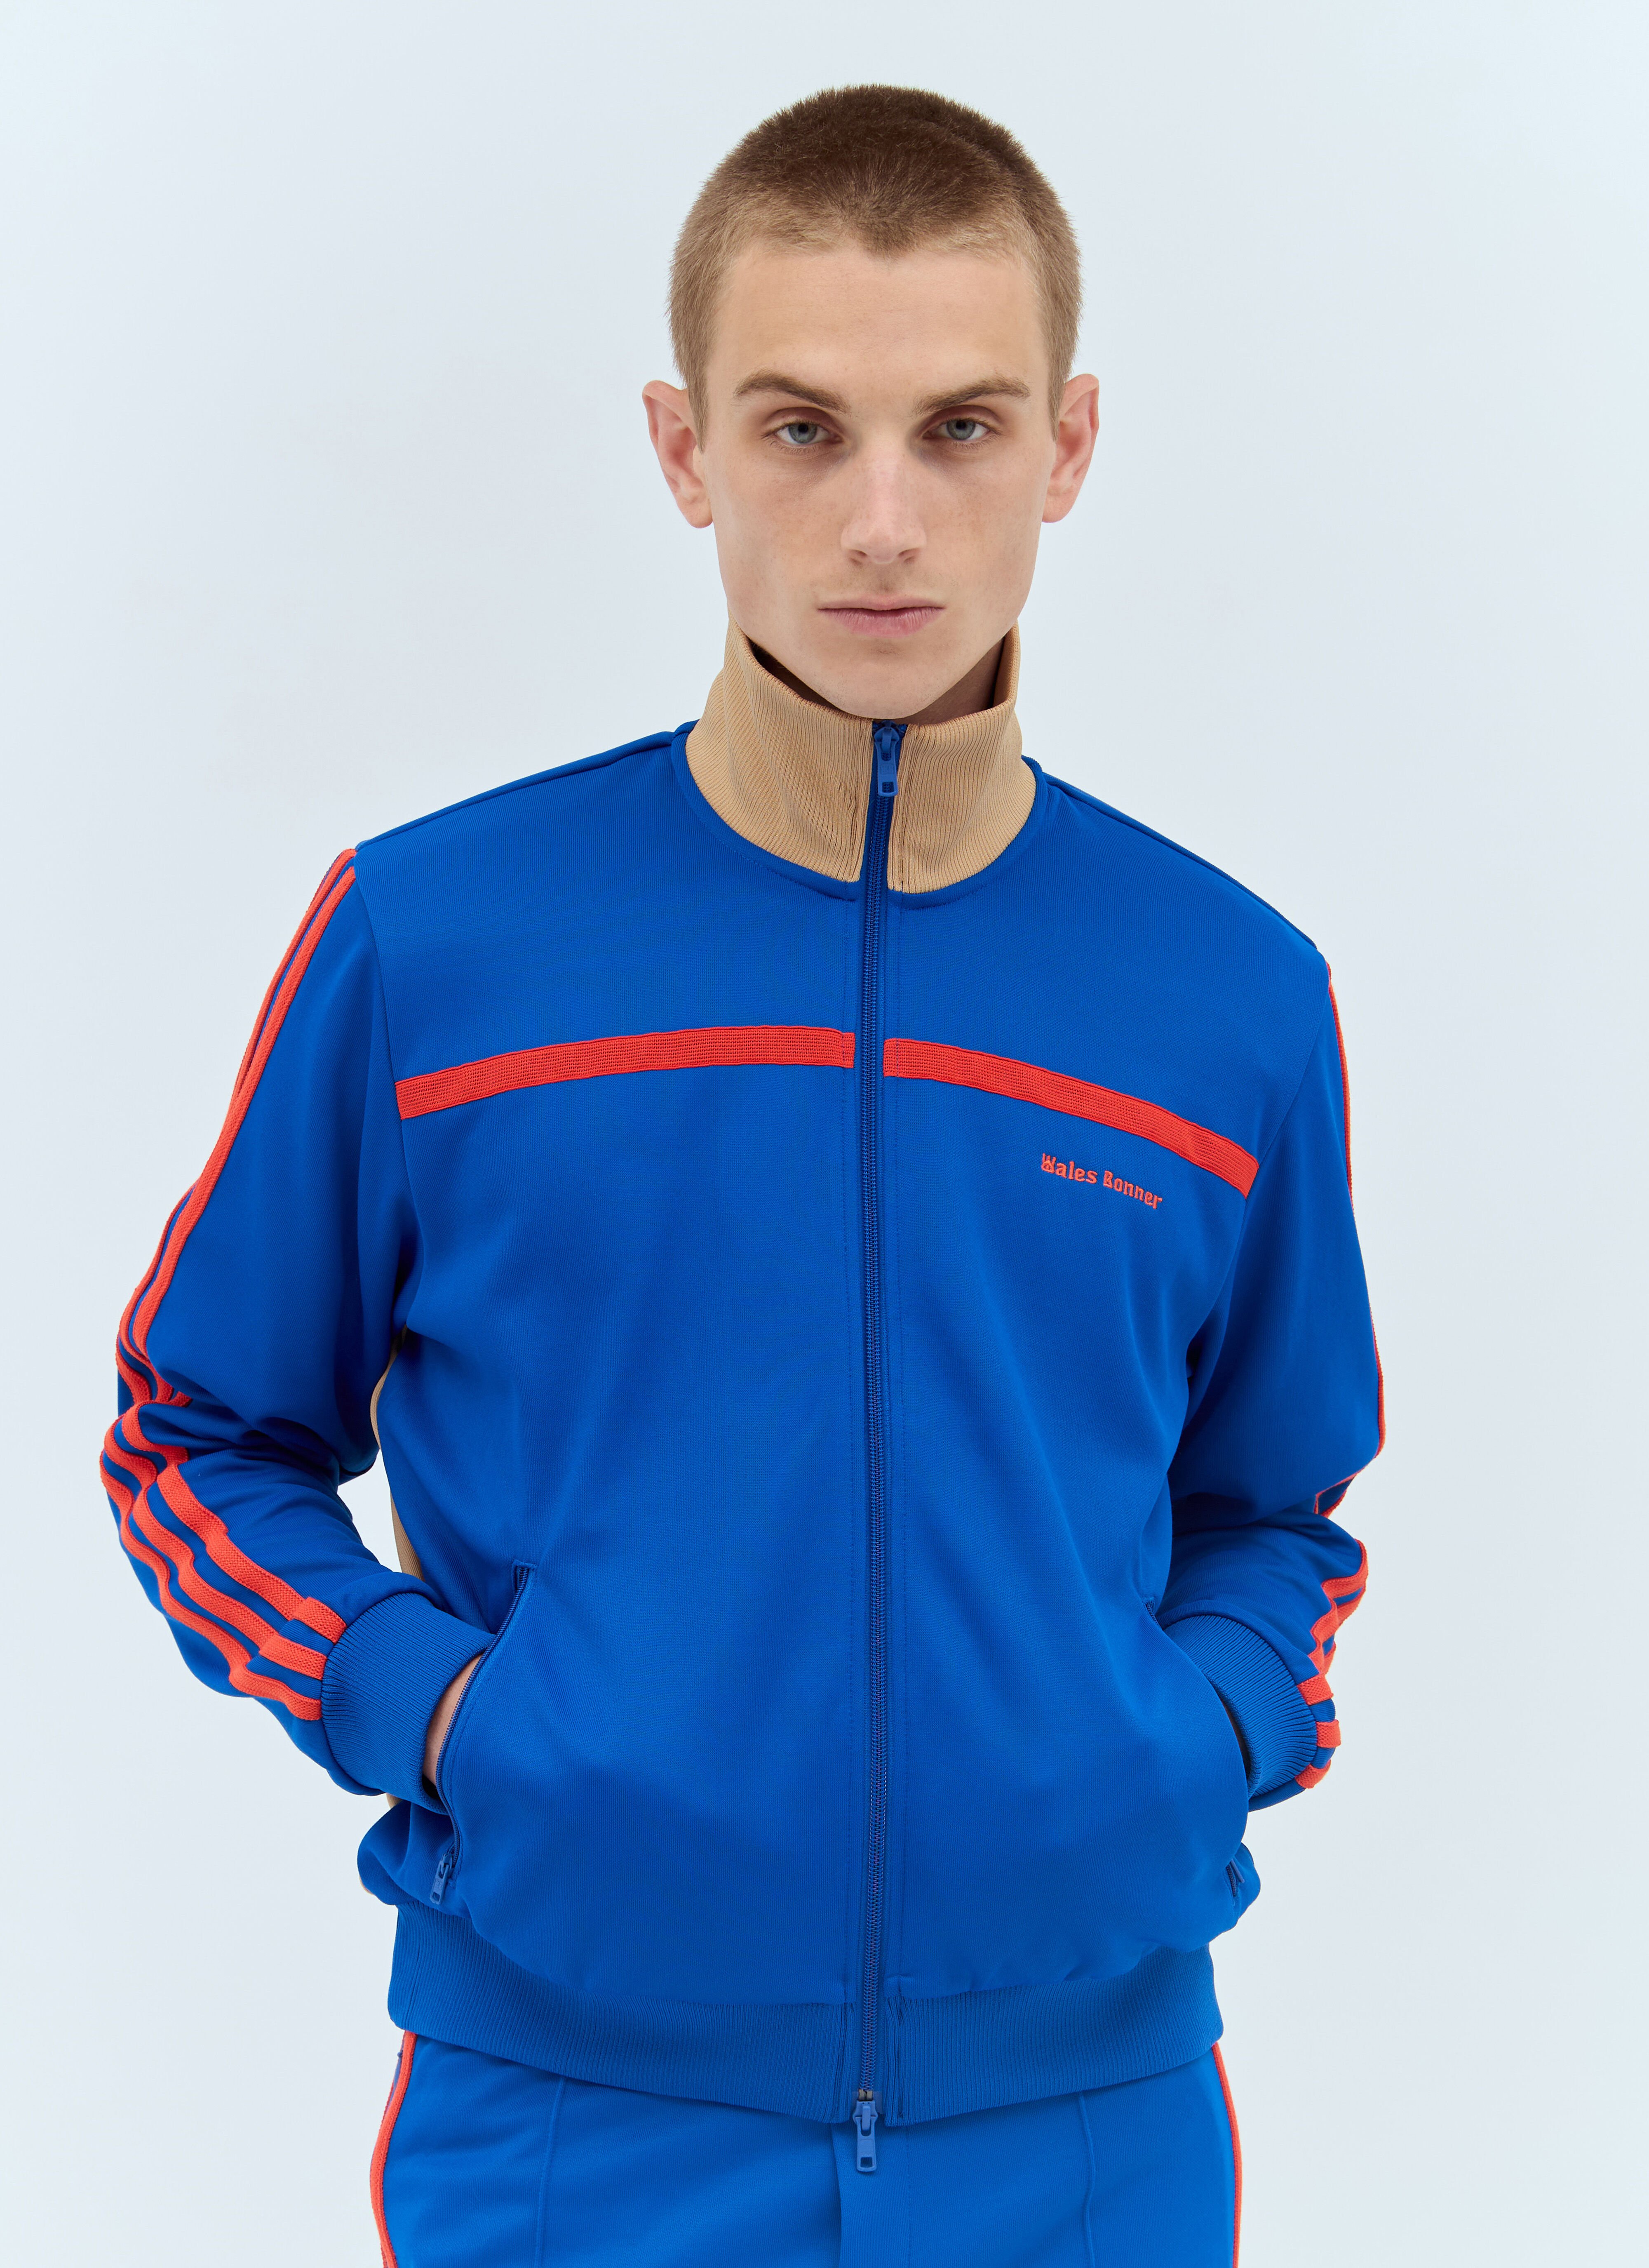 adidas by Wales Bonner Jersey Track Jacket Blue awb0357015